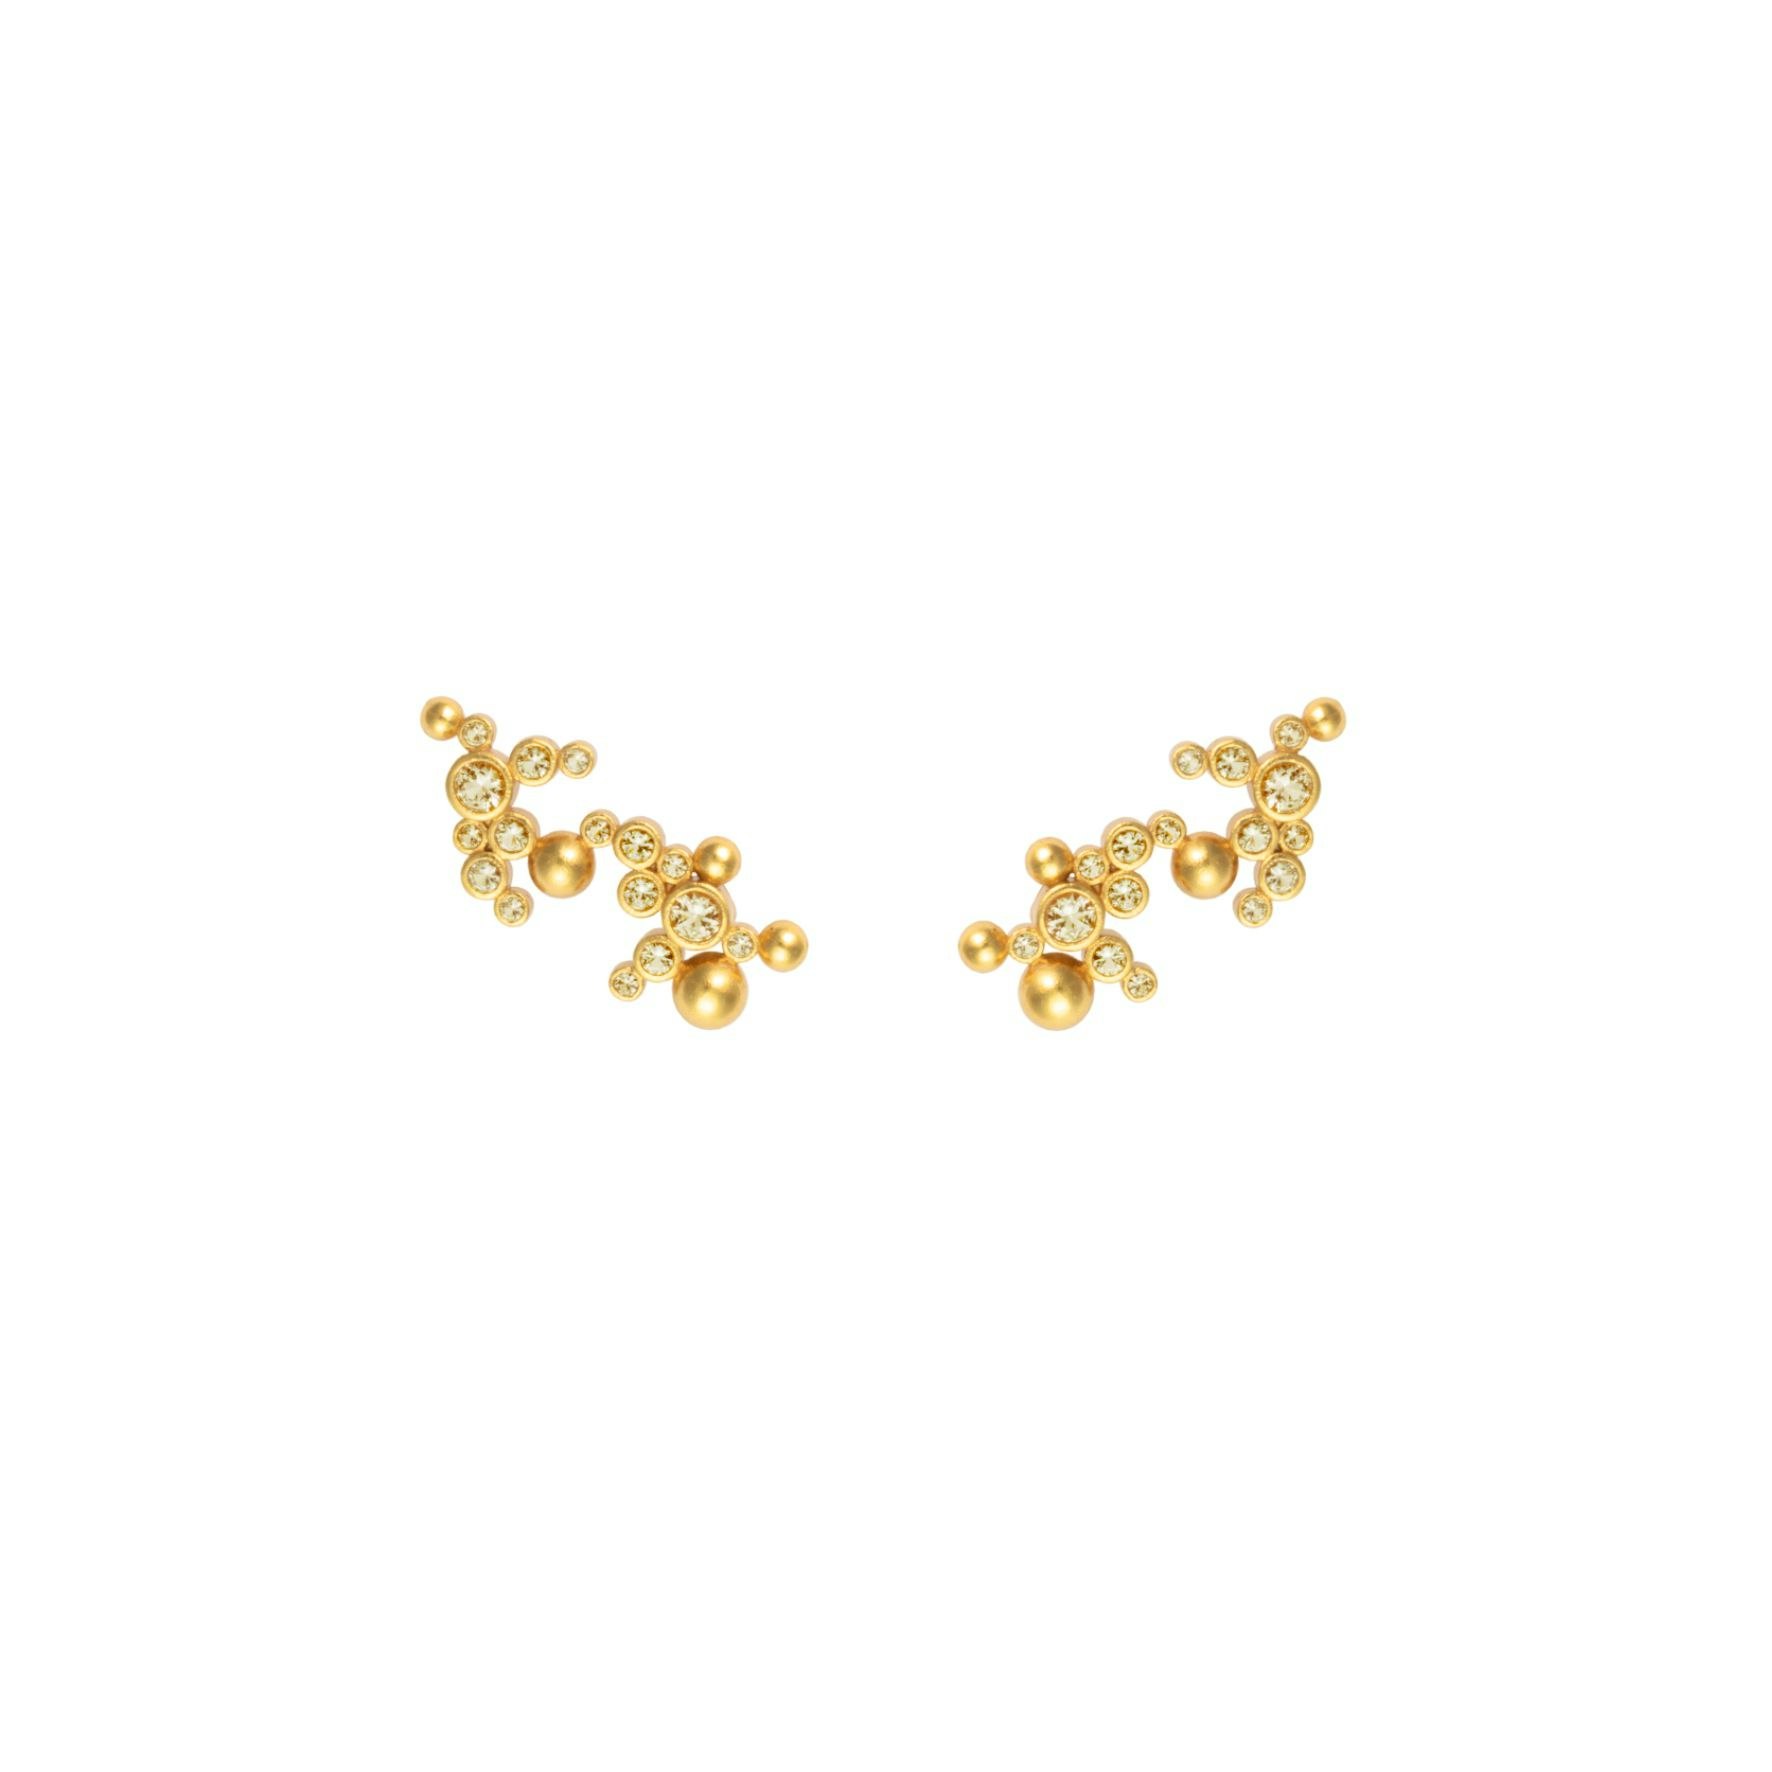 Nebula Earsticks from House Of Vincent in Goldplated Silver Sterling 925